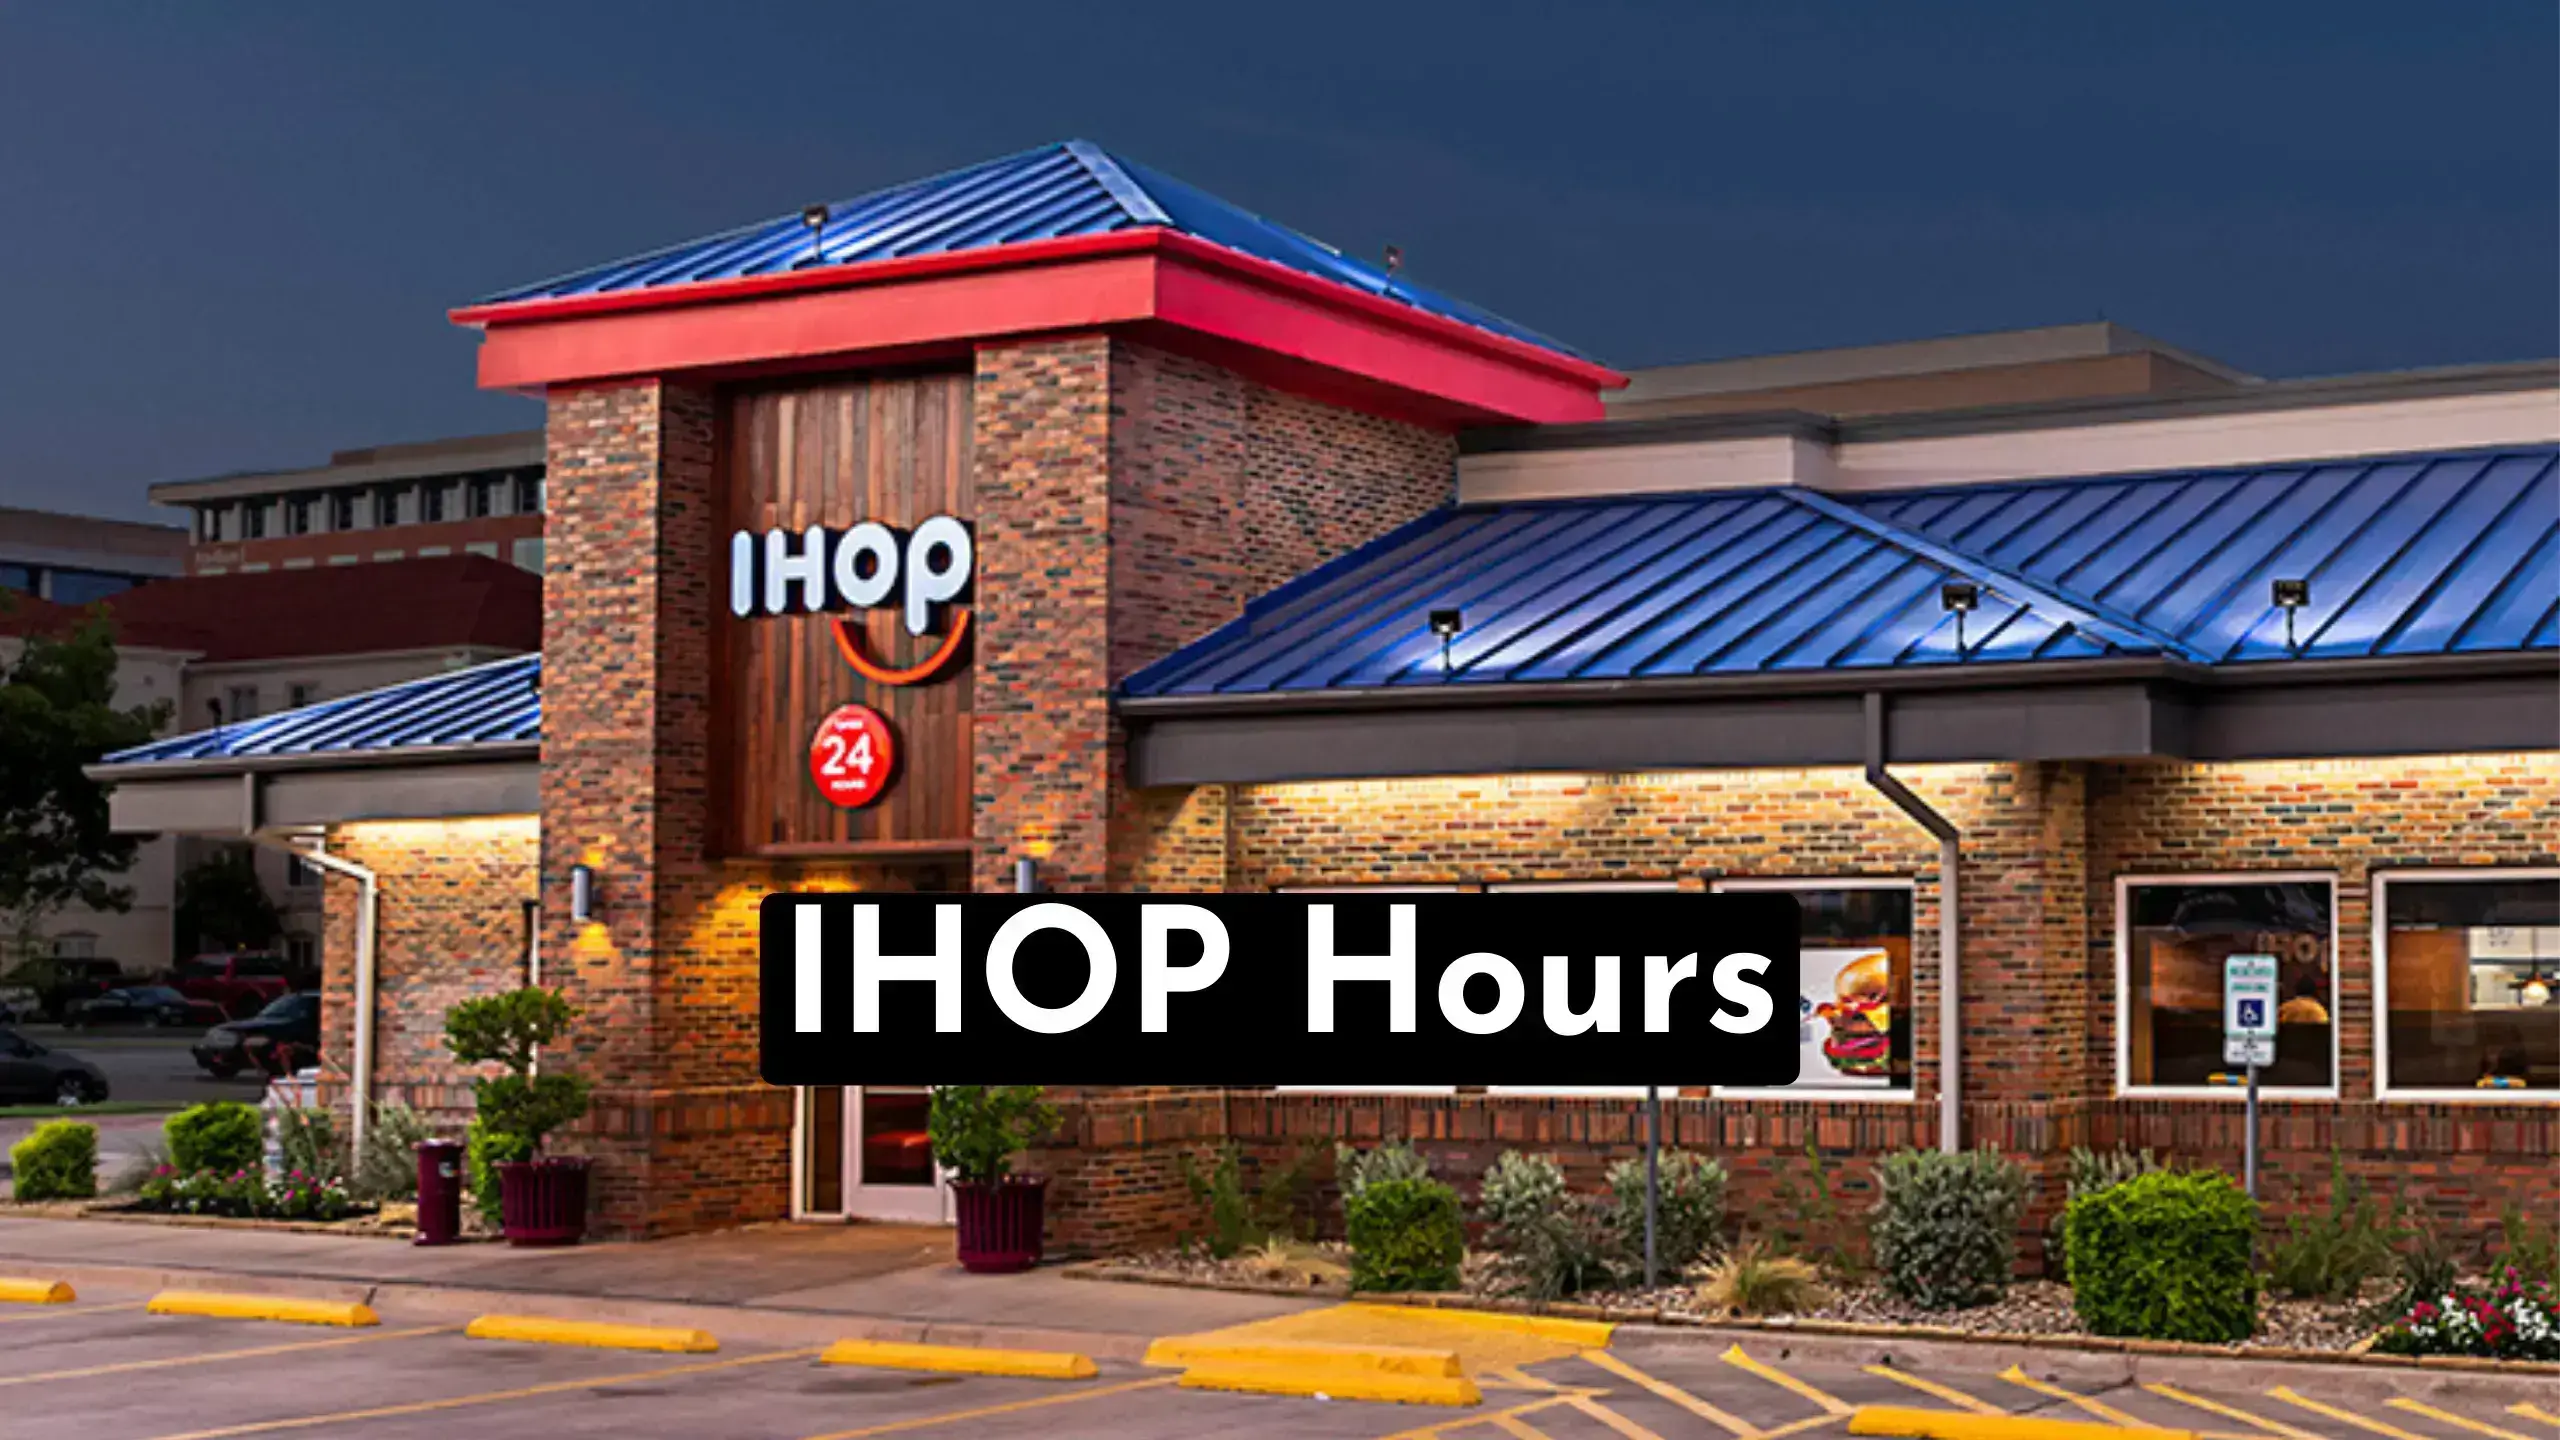 Plan Your Trip With Ease By Finding Ihop Hours & Near Me Locations Guide | Also Find At What Time Does Ihop Open & Close ? | store-hour.com